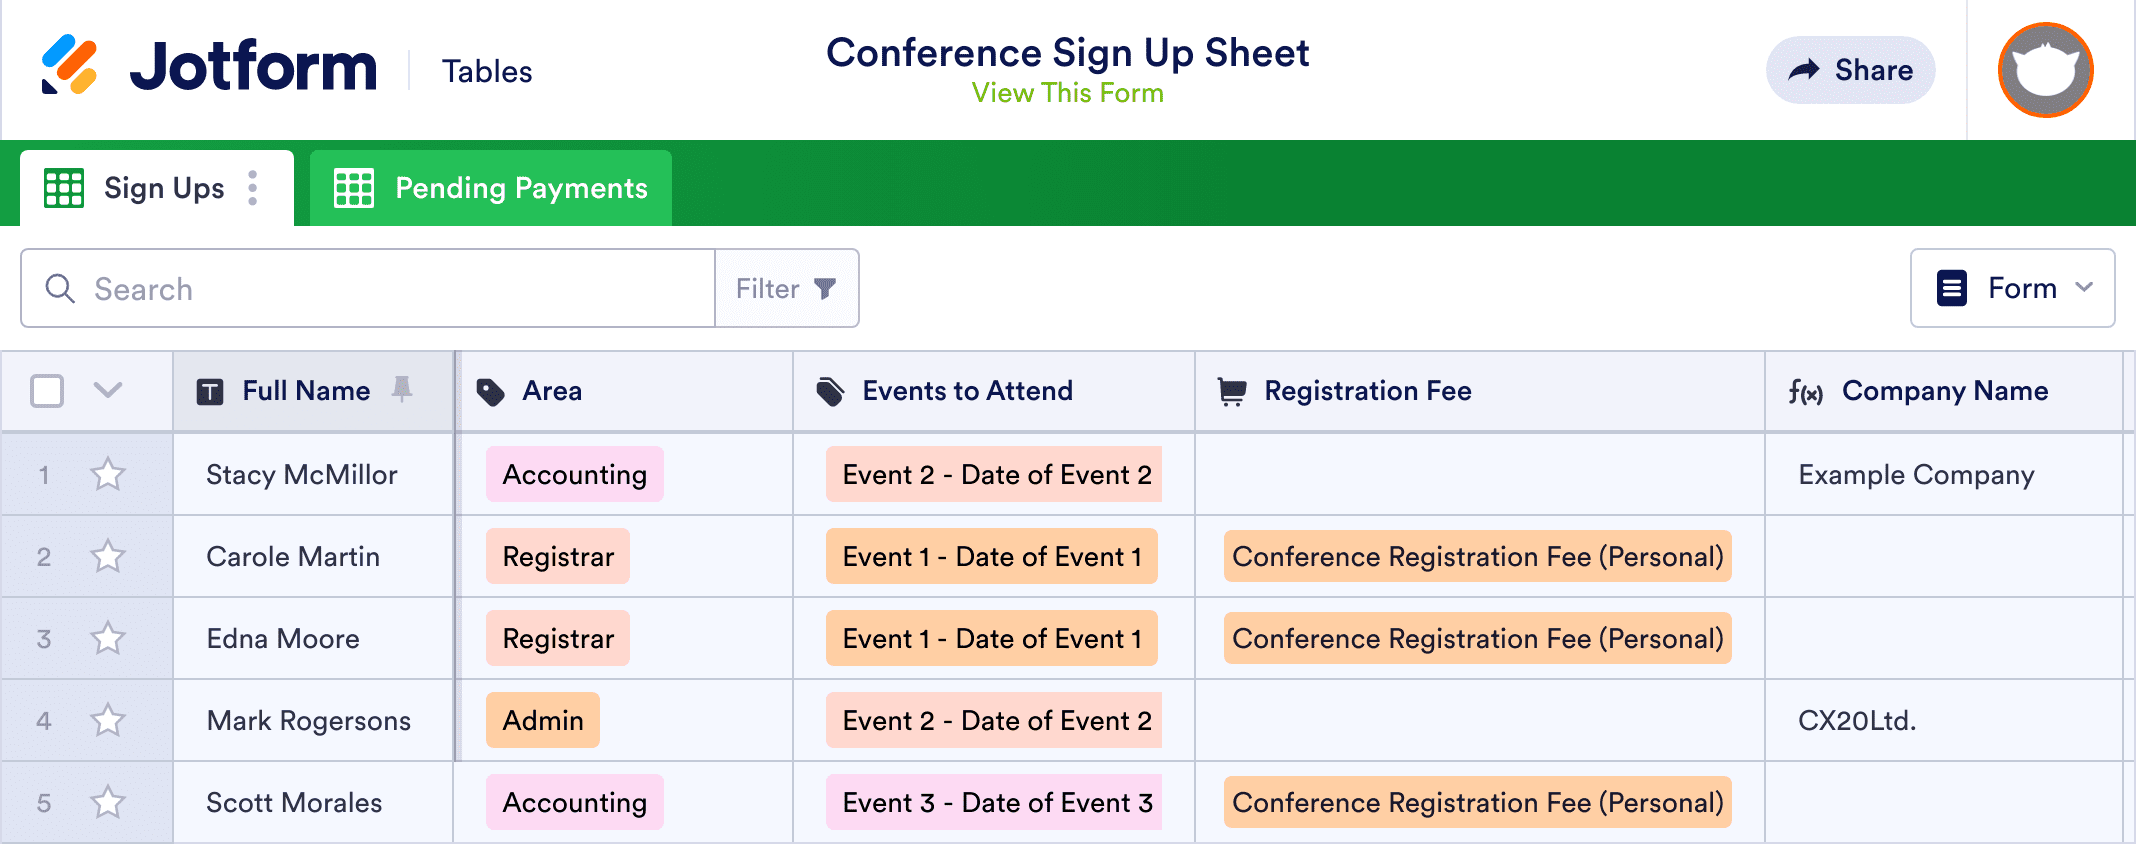 Conference Sign Up Sheet Template | Jotform Tables